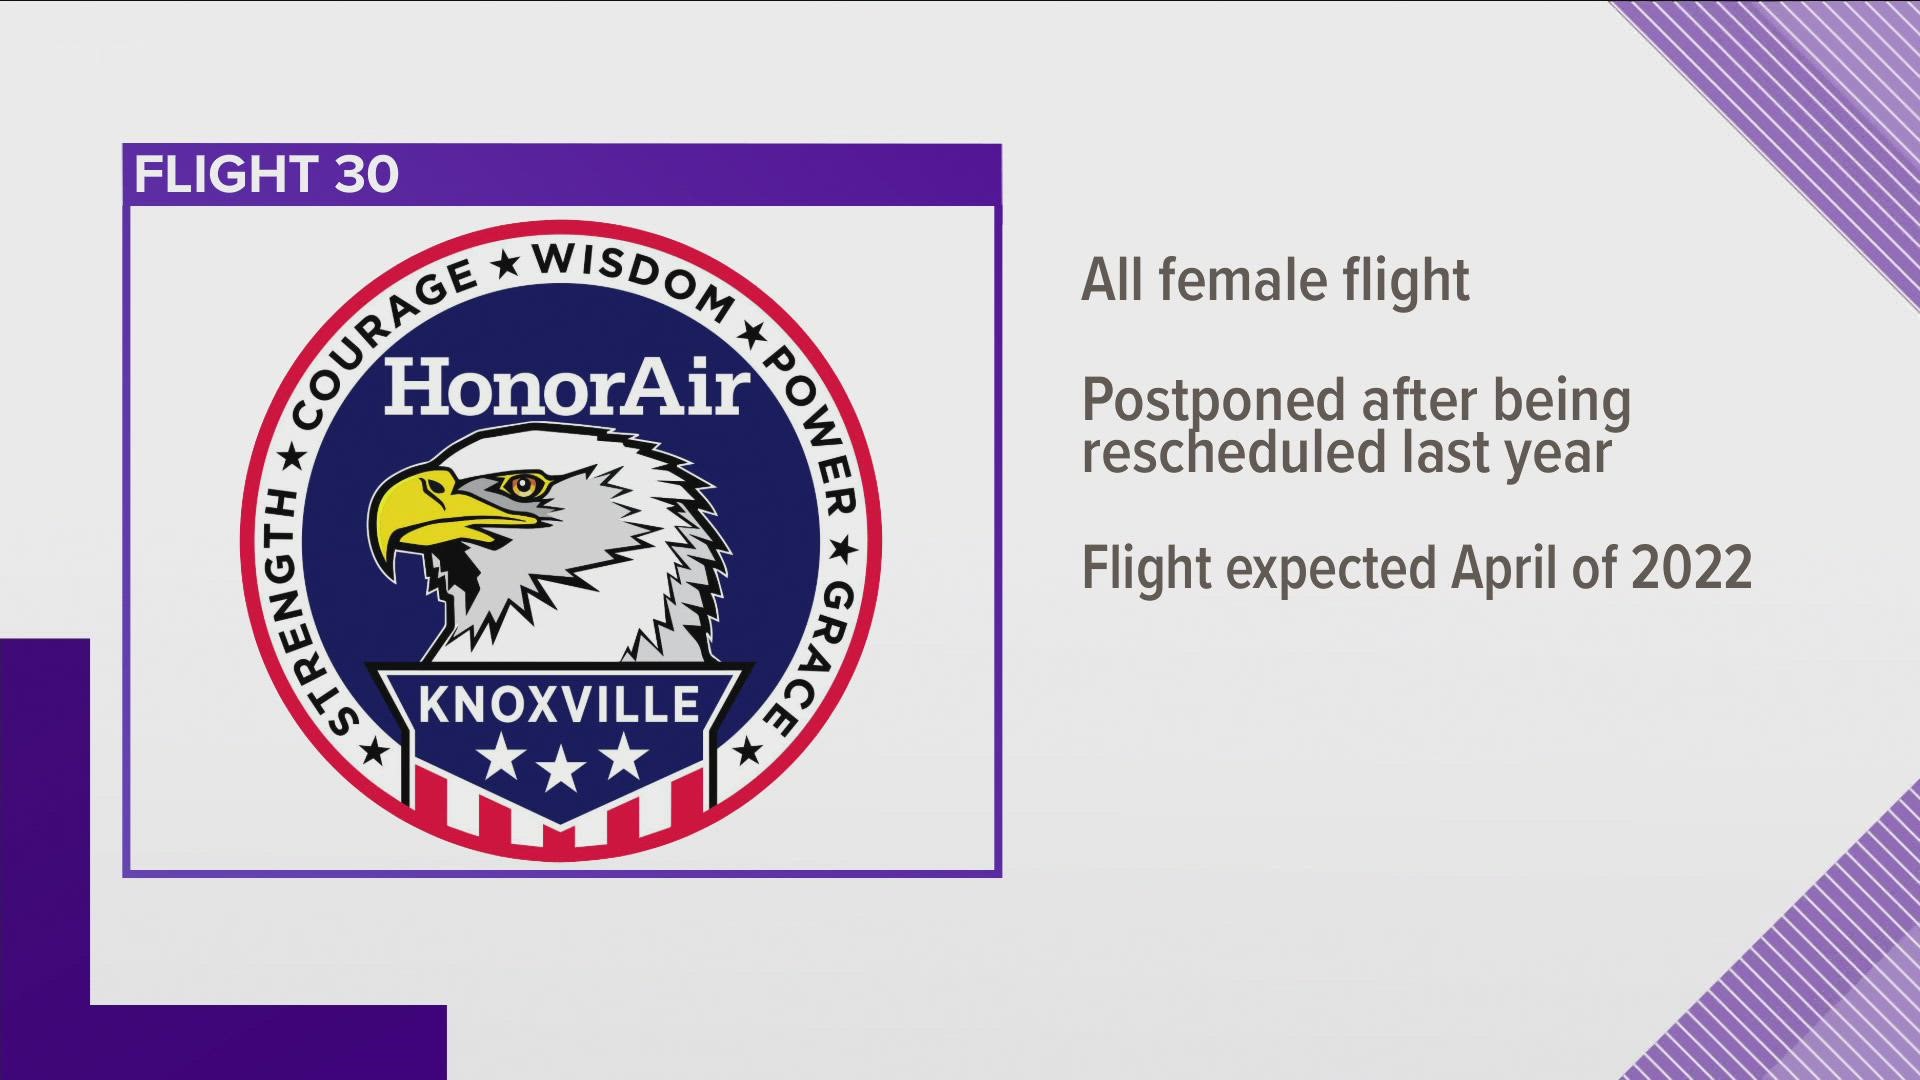 Officials announced that the HonorAir flight to honor women veterans from East Tennessee will be postponed again so that nobody's health is put at risk.